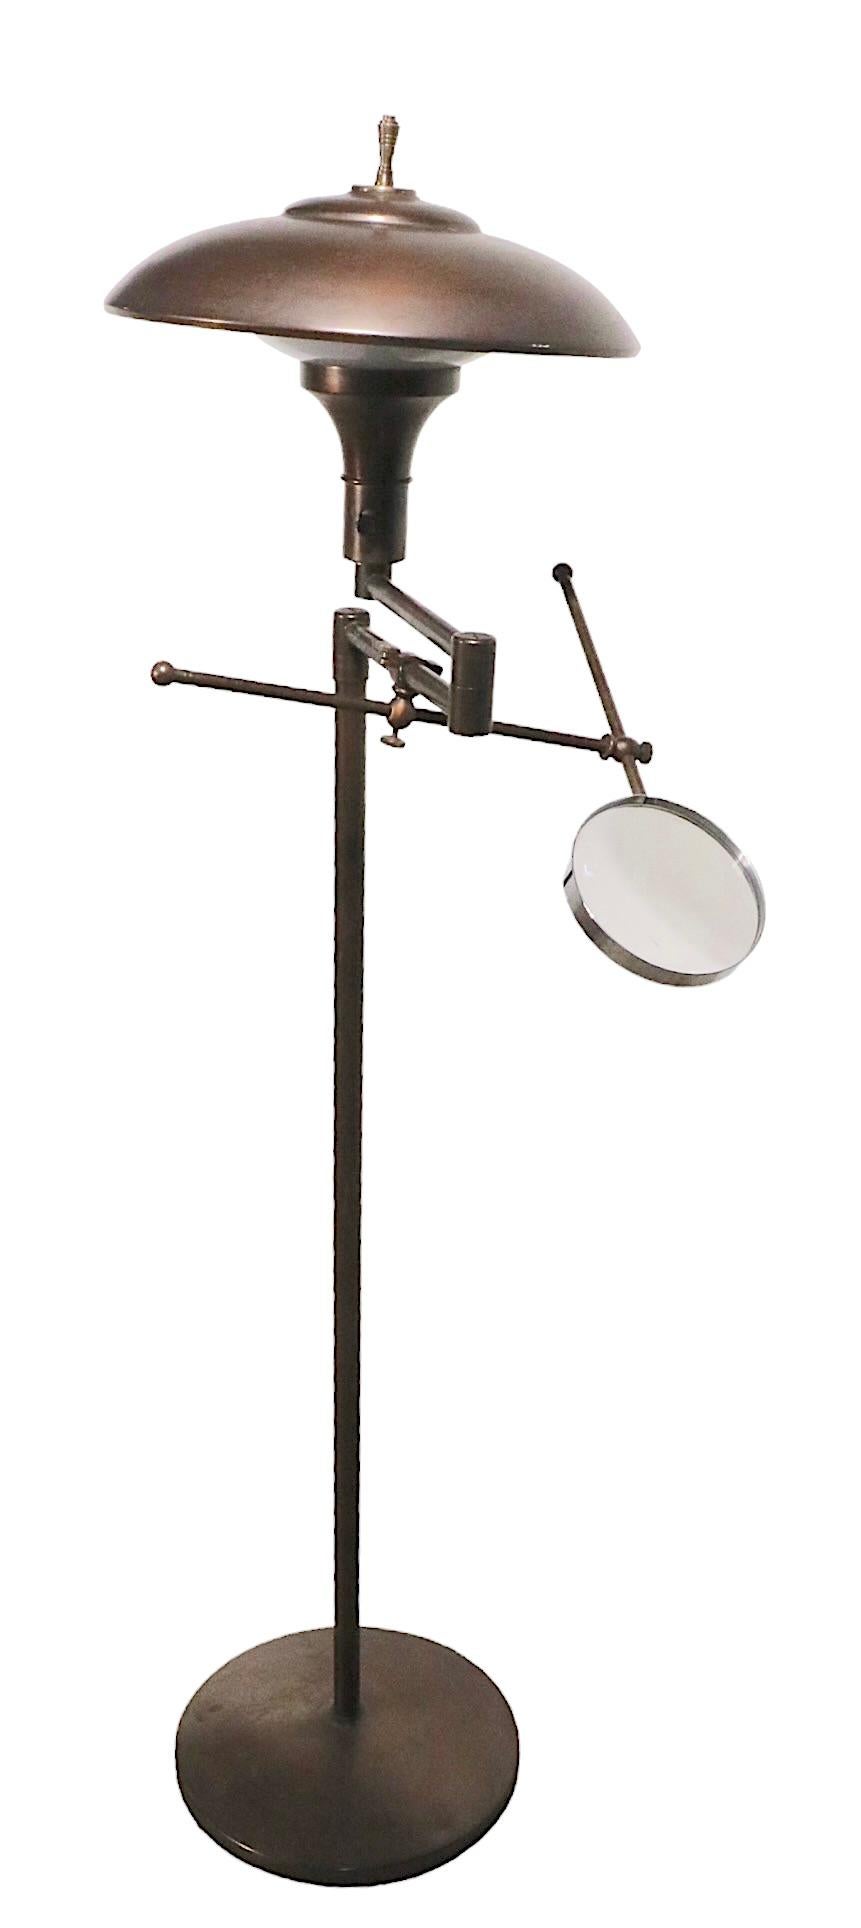 Adjustable Floor Lamp with Magnifying Glass, Faries Lamp Co. circa 1920-1940 For Sale 5